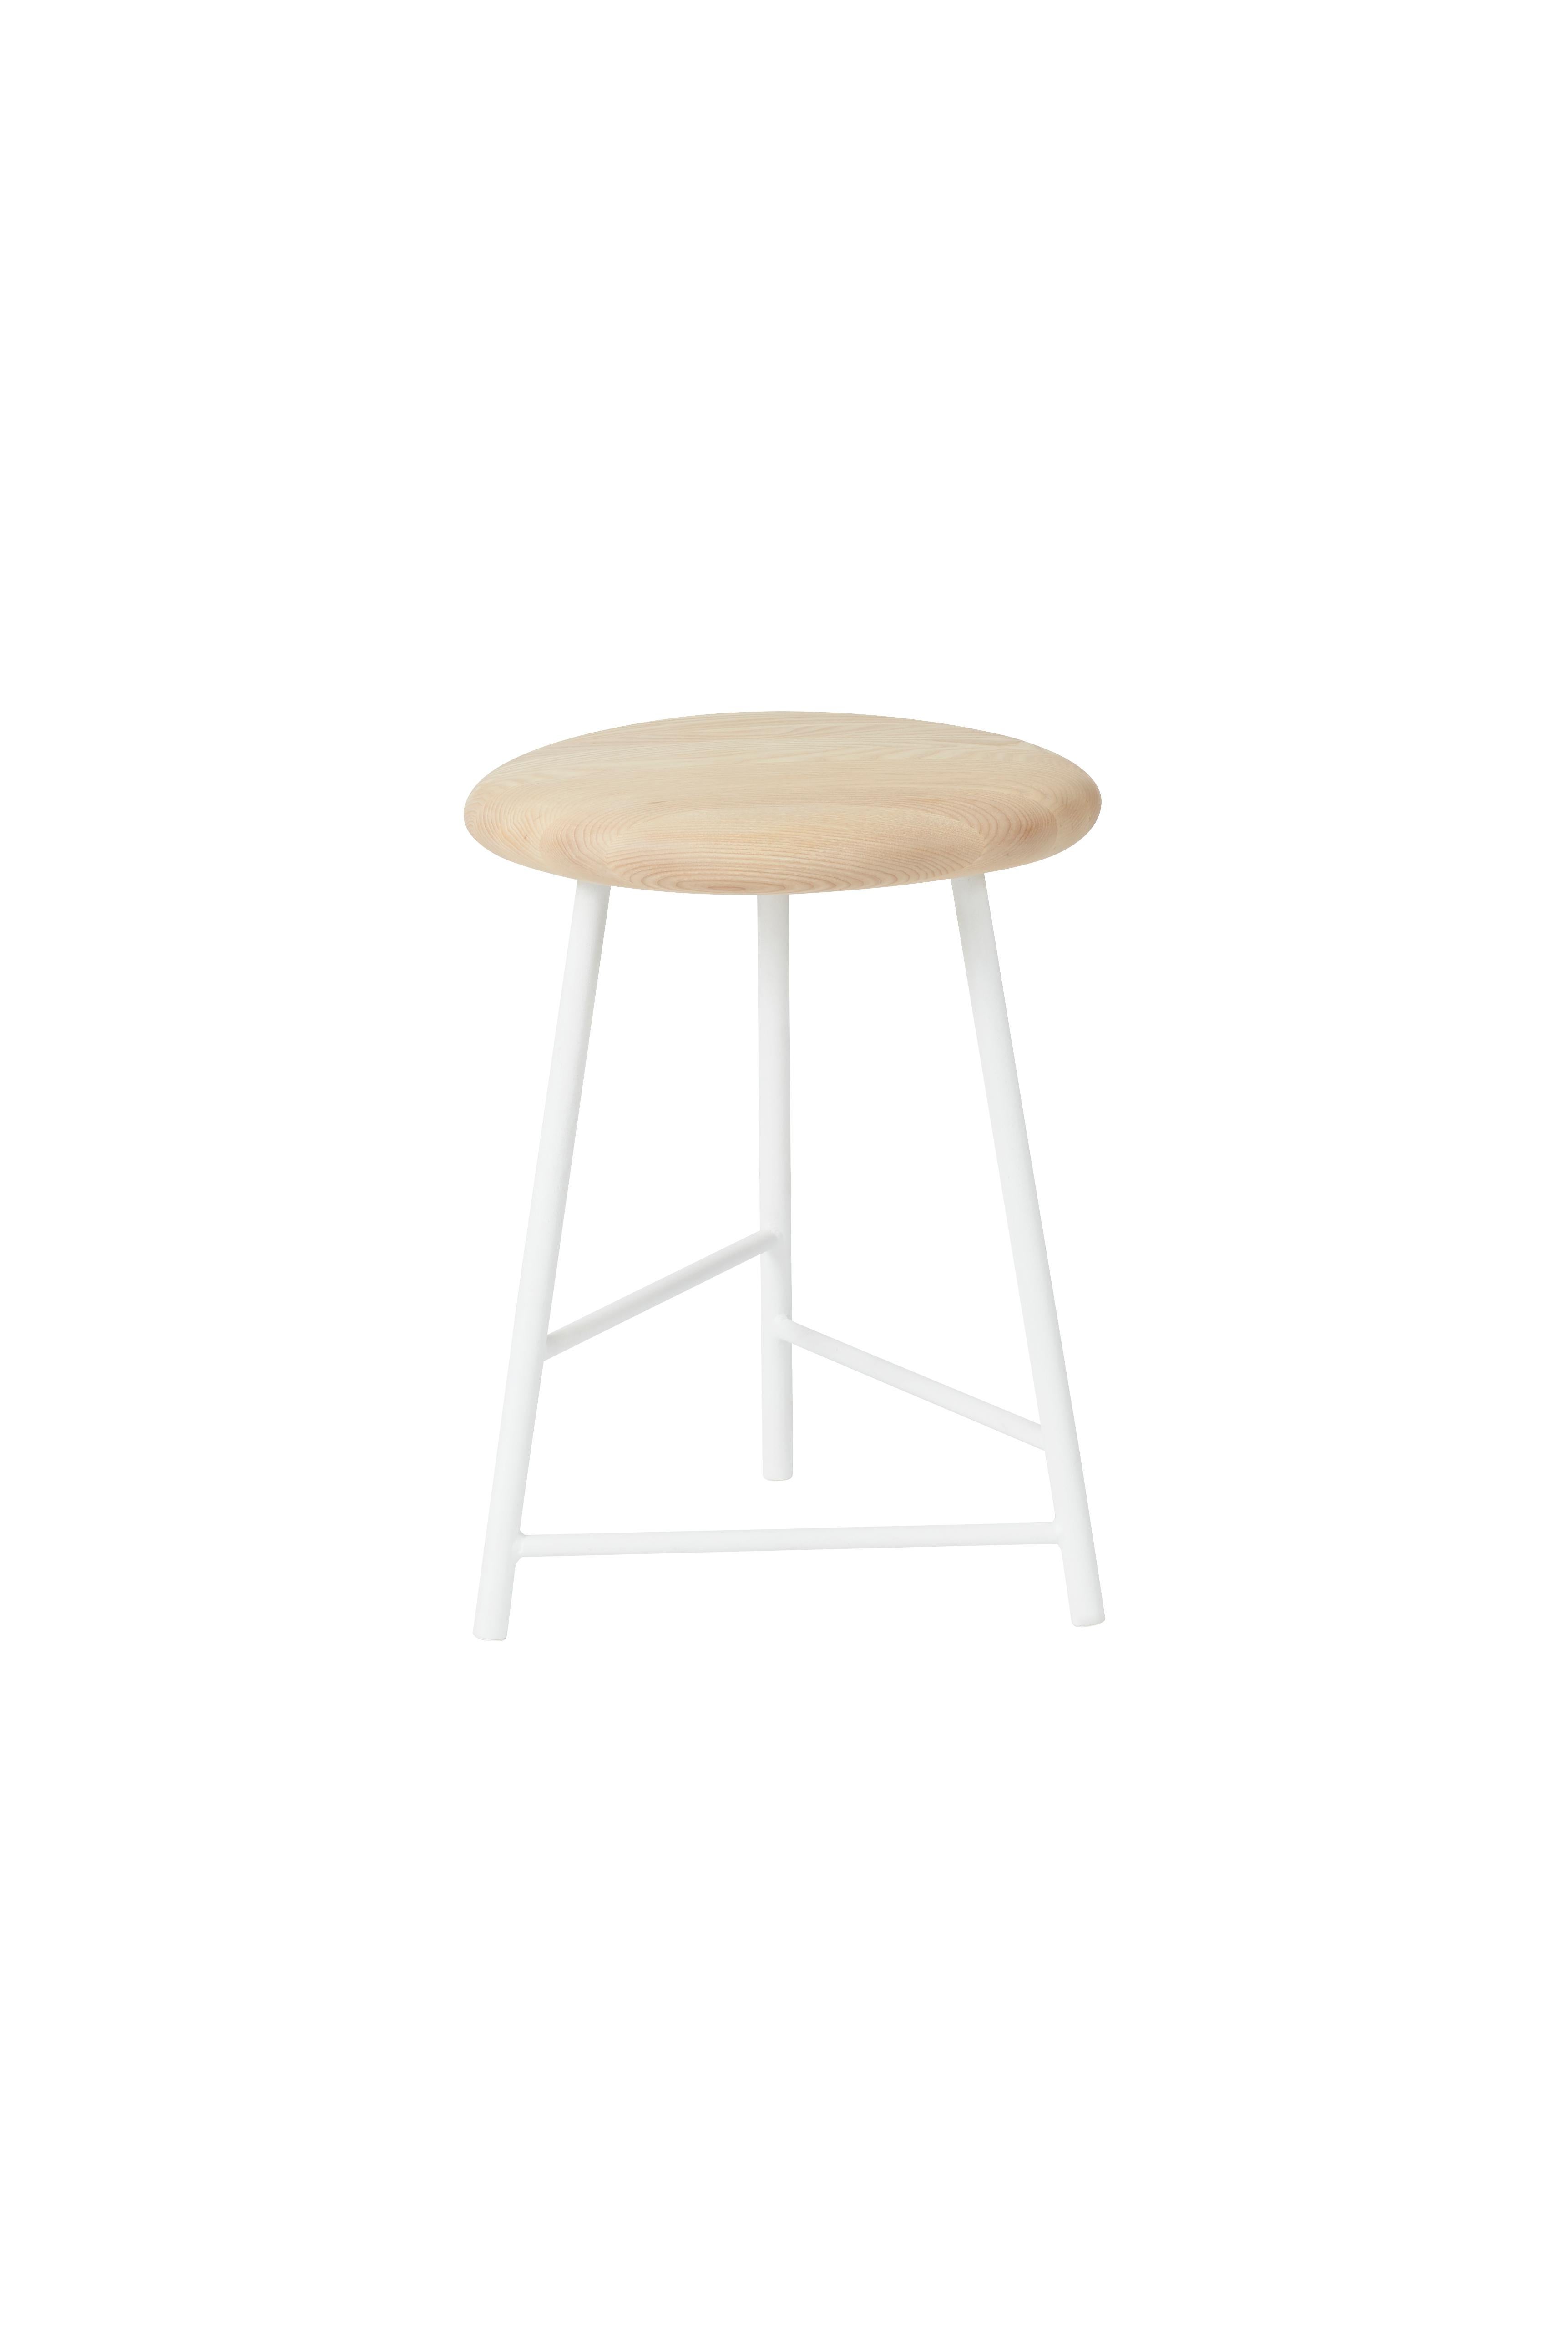 For Sale: White (Ash/White) Pebble Stool, by Welling / Ludvik from Warm Nordic